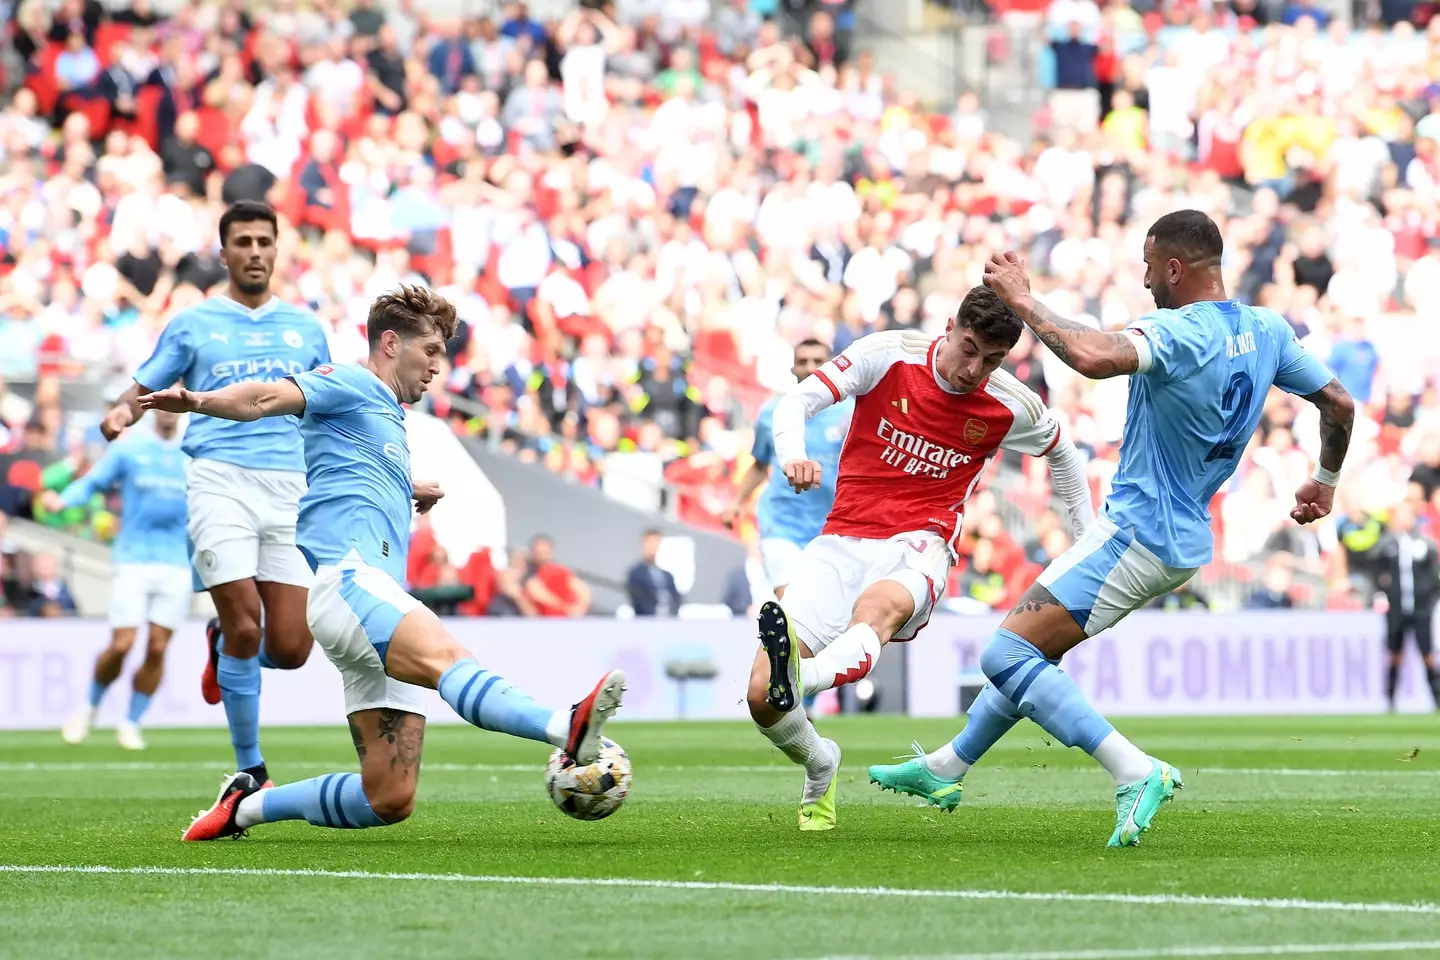 Arsenal beat Manchester City in the Community Shield at the start of the season. (